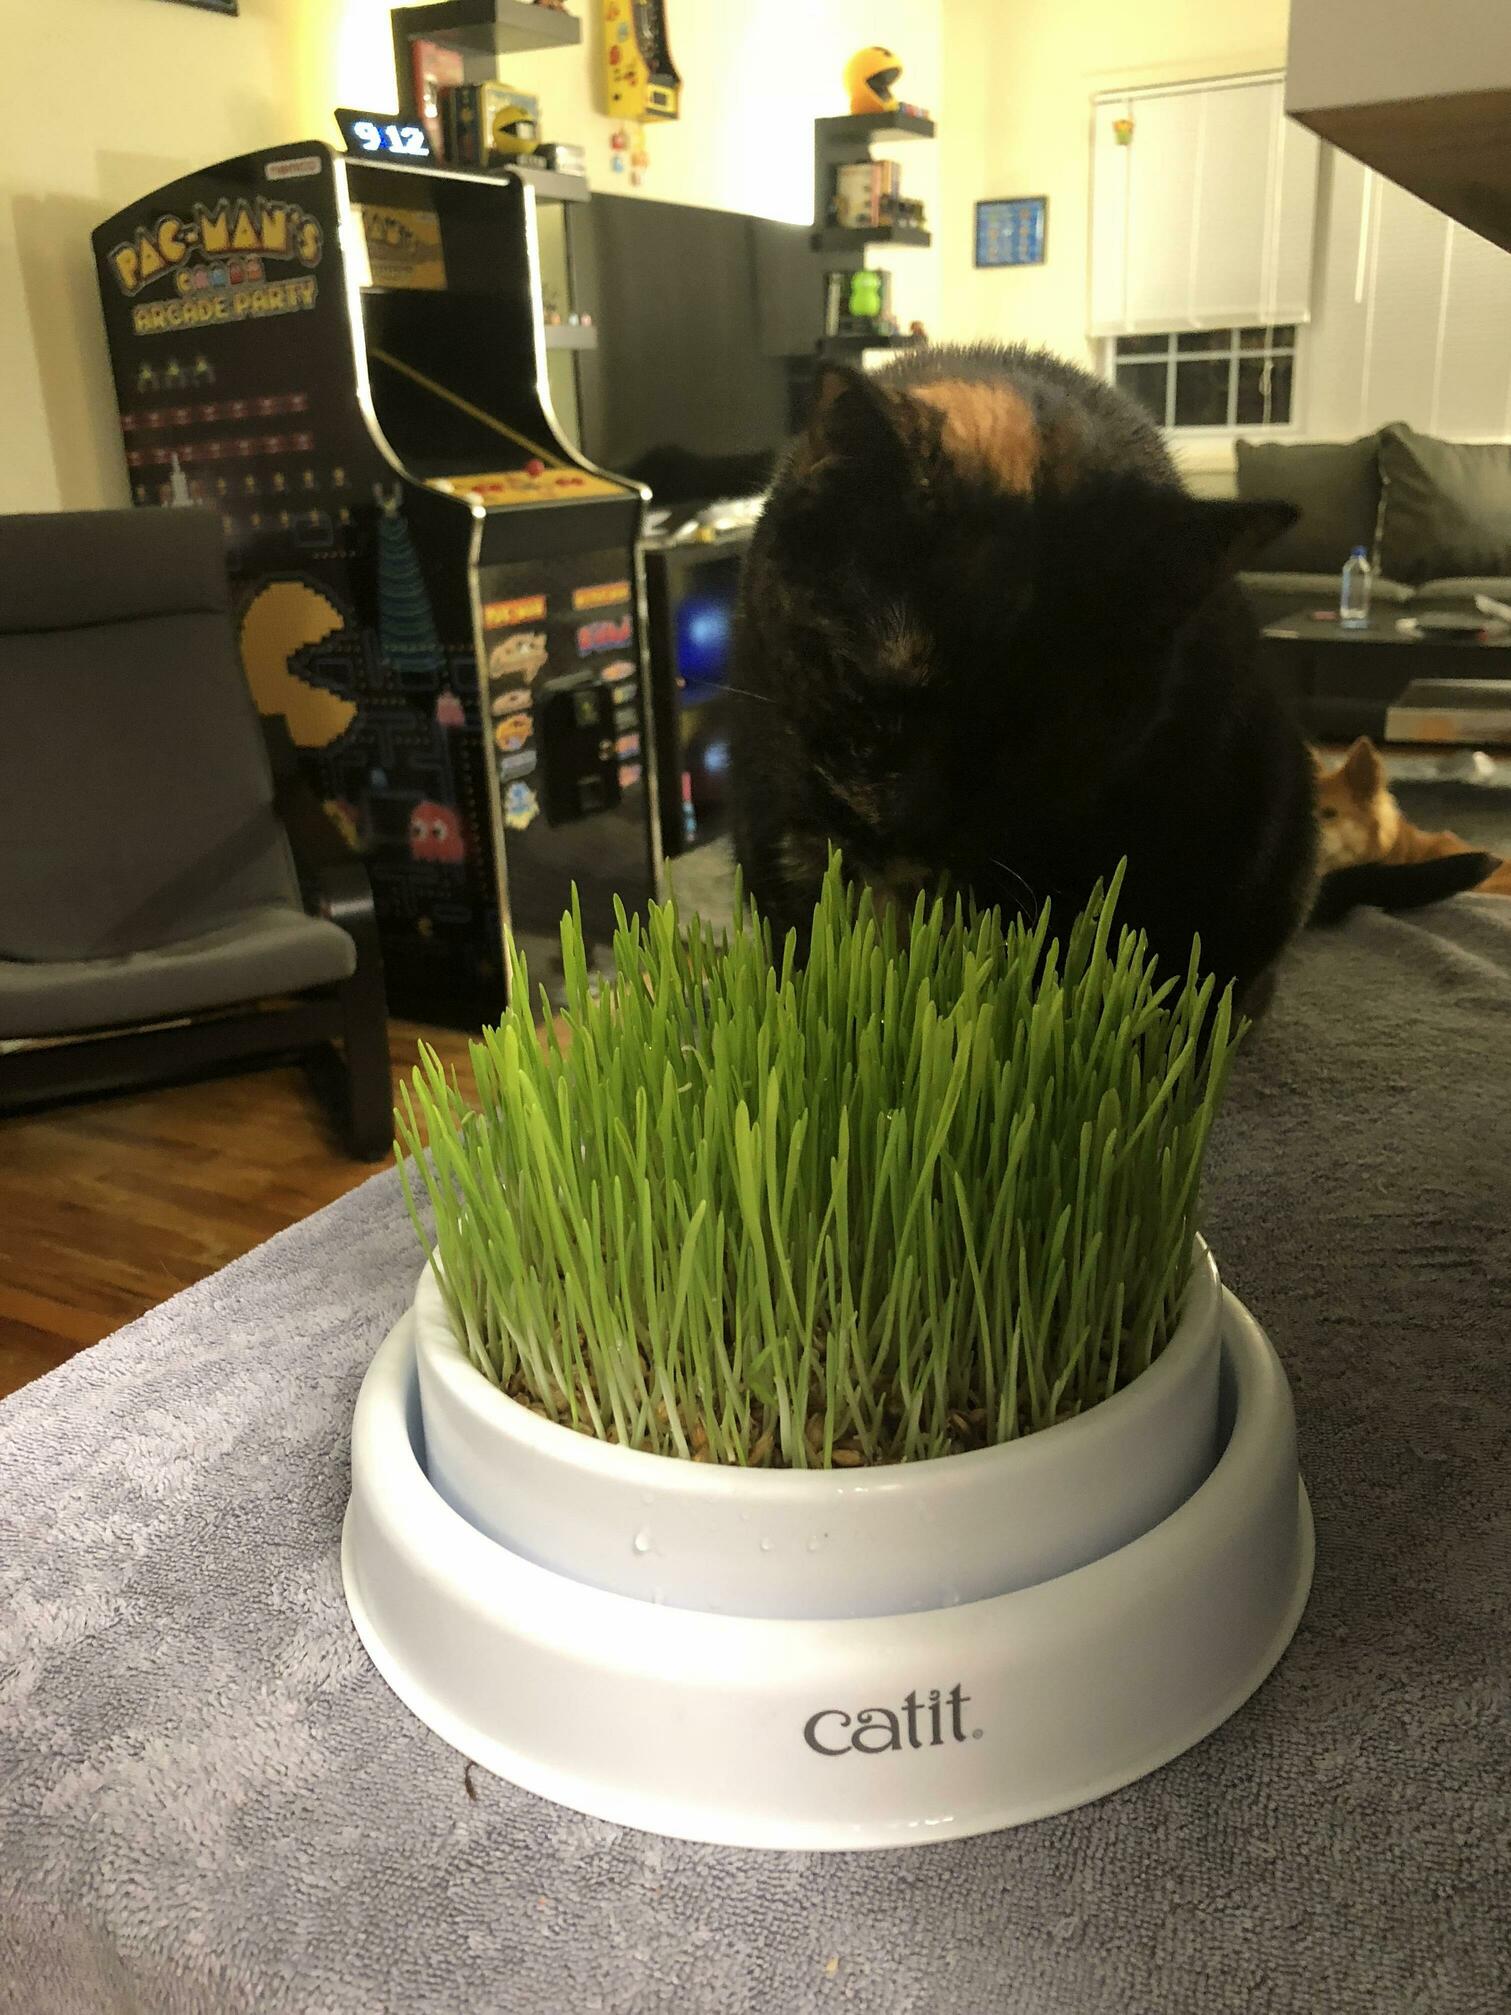 Spent a week and a half nurturing cultivating this grass for my little girl and now that she is chomping down on it i feel terrible for the grass!